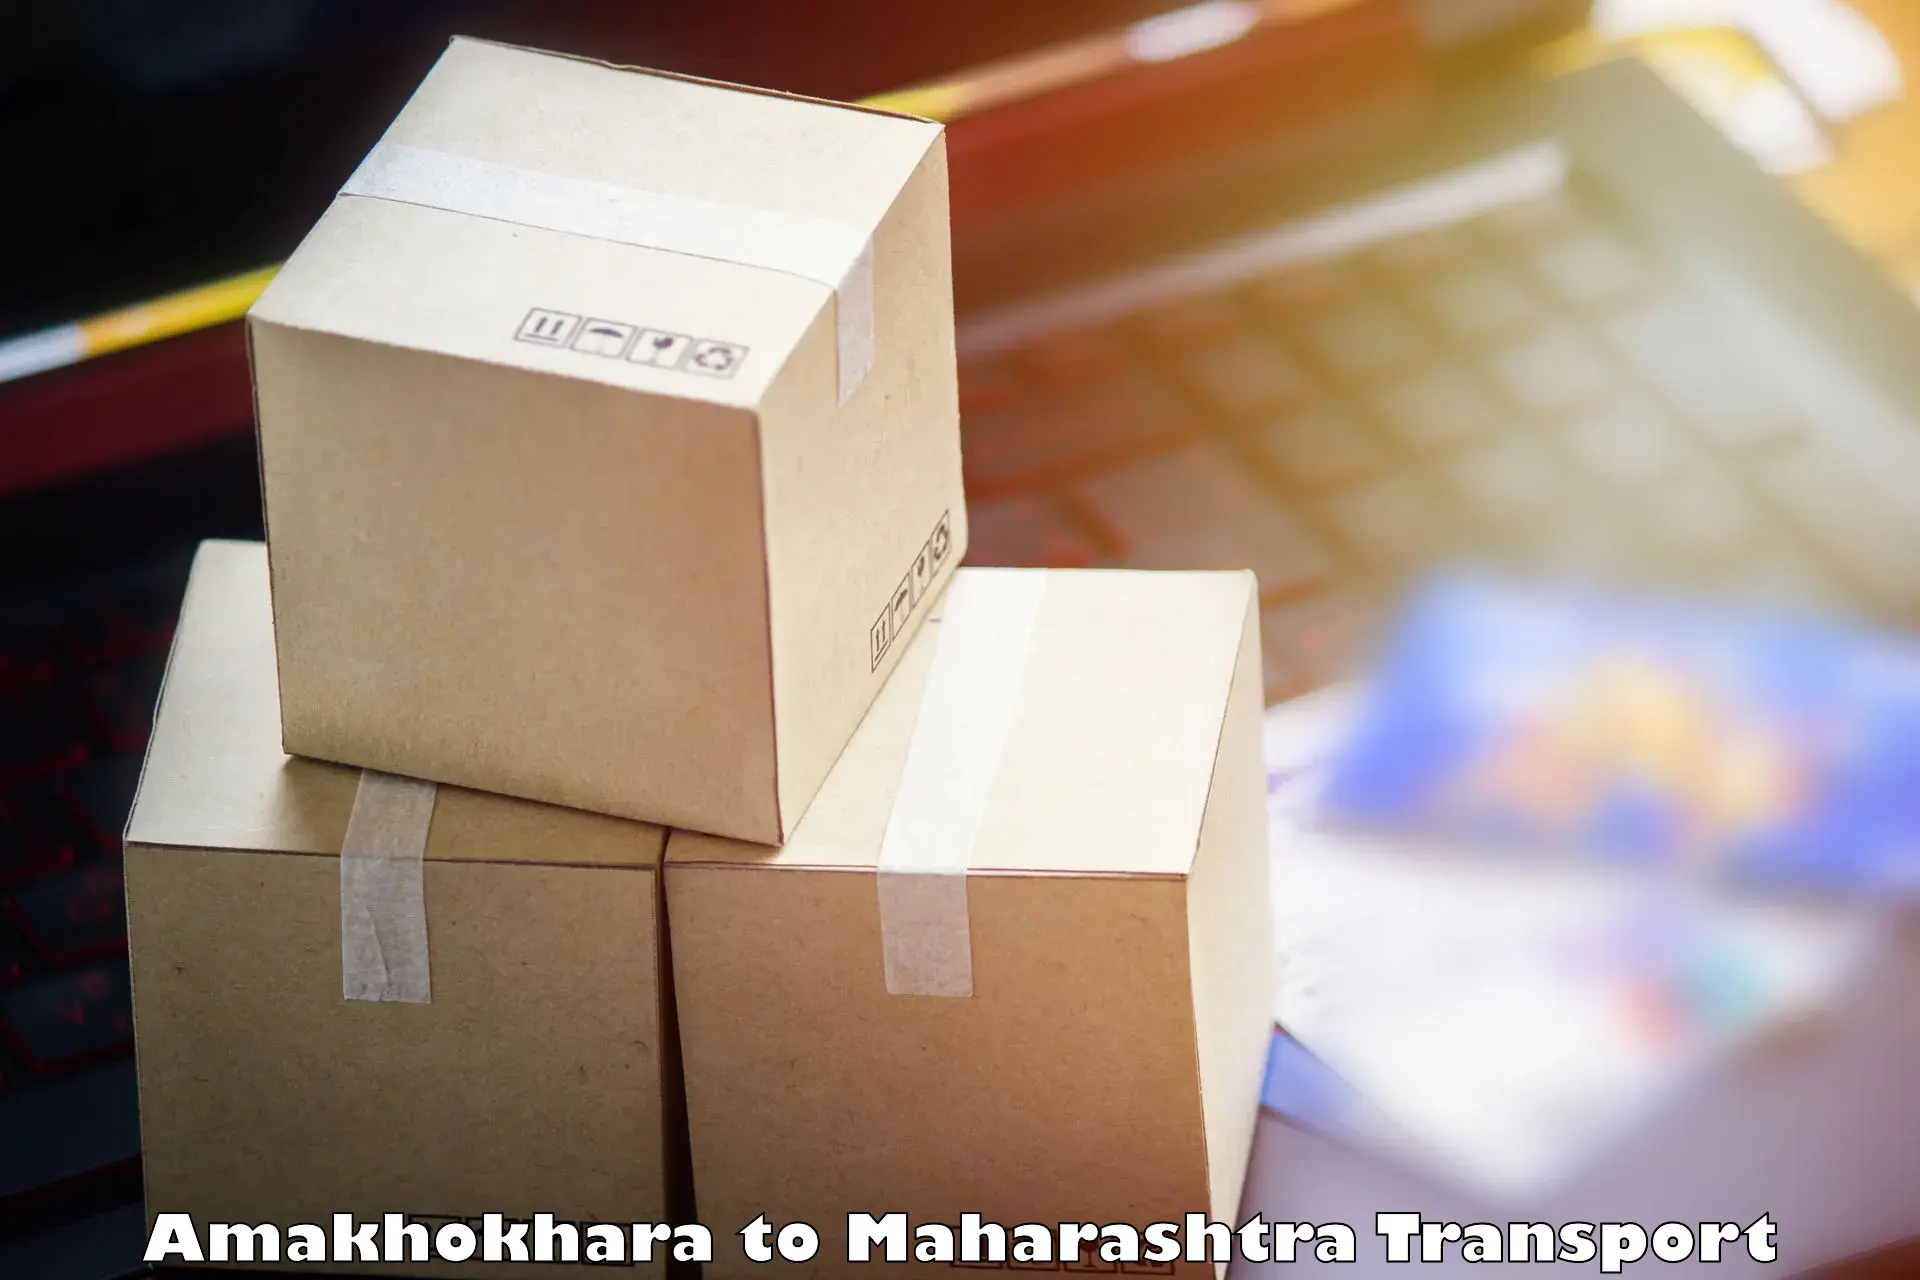 Air freight transport services in Amakhokhara to Sindhudurg